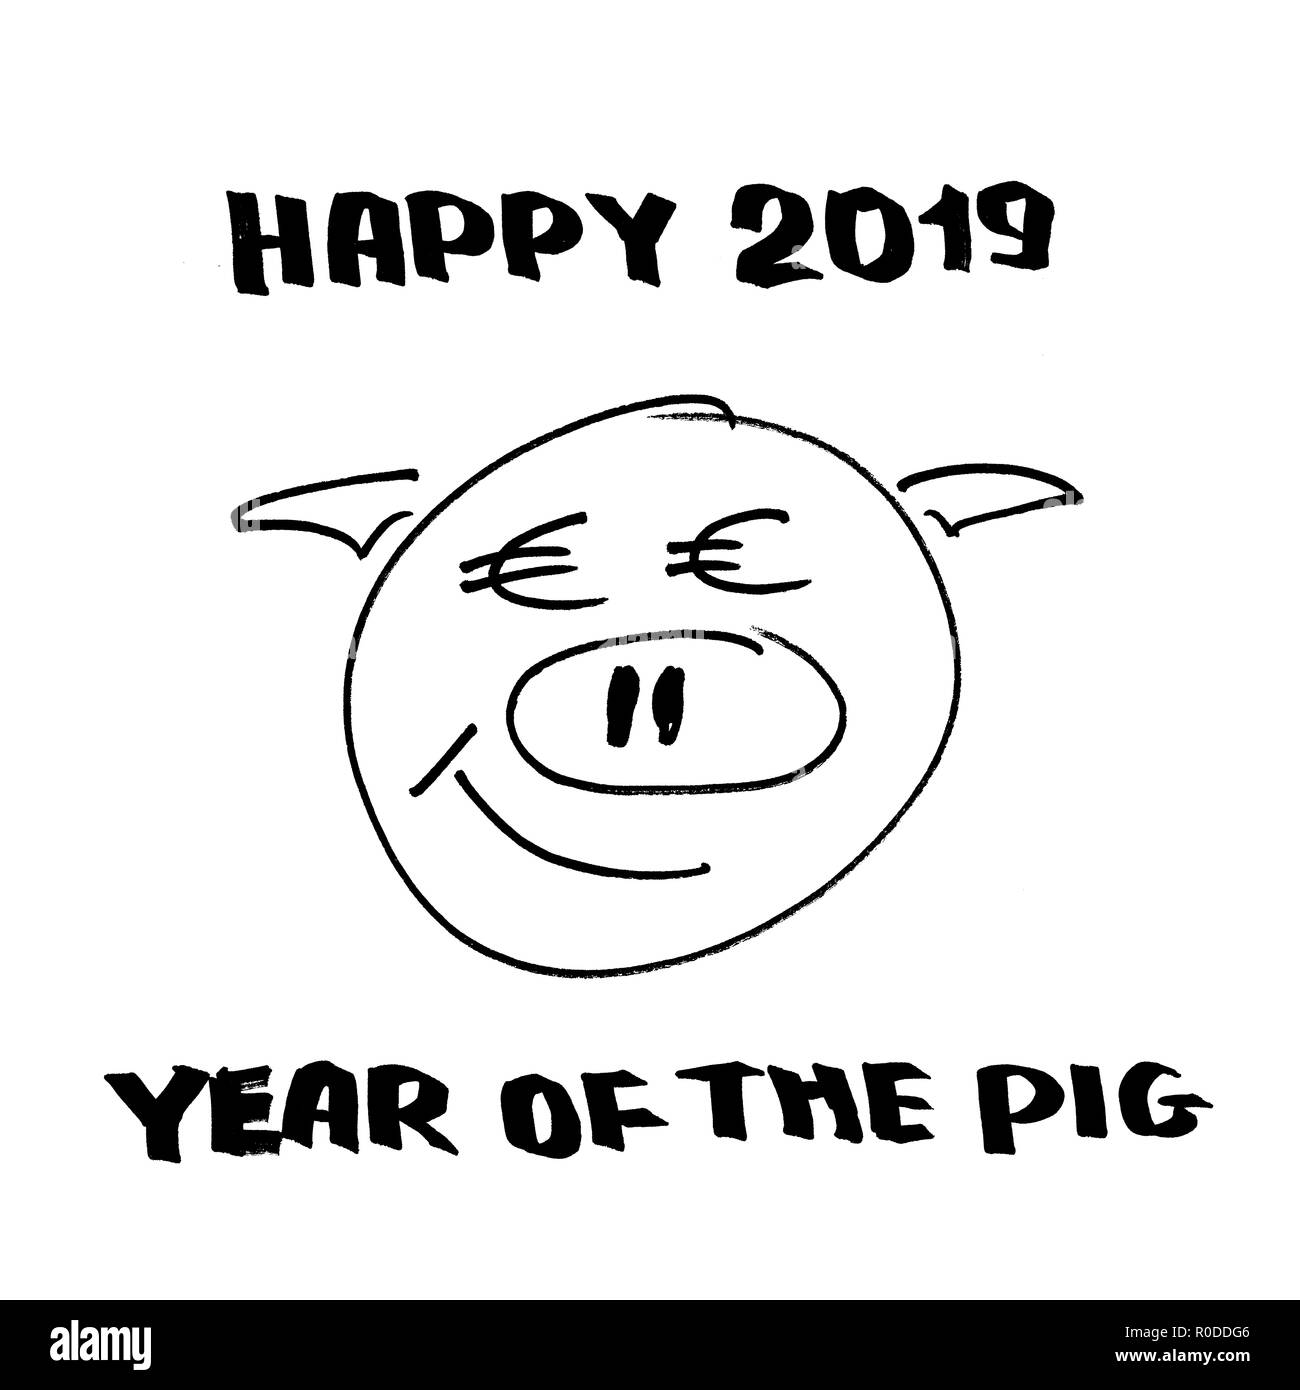 Happy 2019 year of the pig - cheerful pig muzzle with greetings Stock Photo